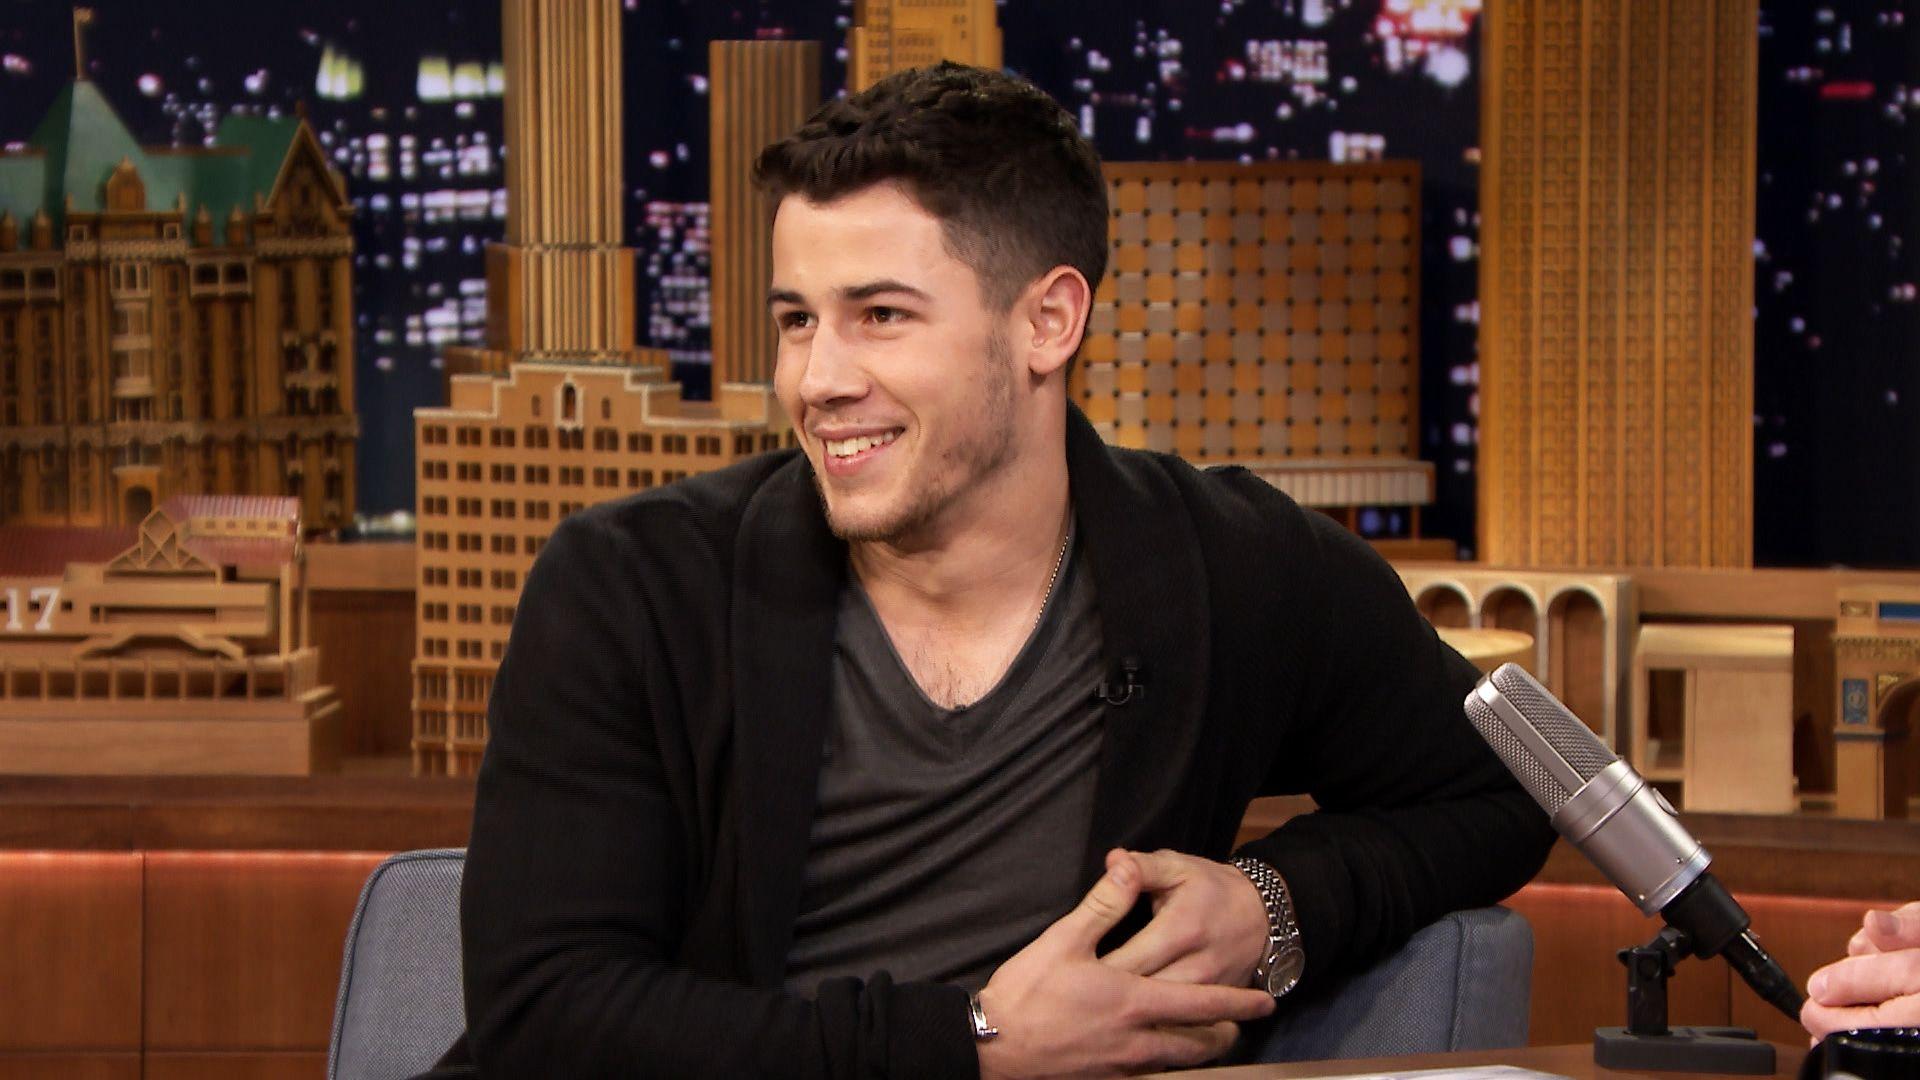 Nick Jonas Wallpapers Image Photos Pictures Backgrounds.